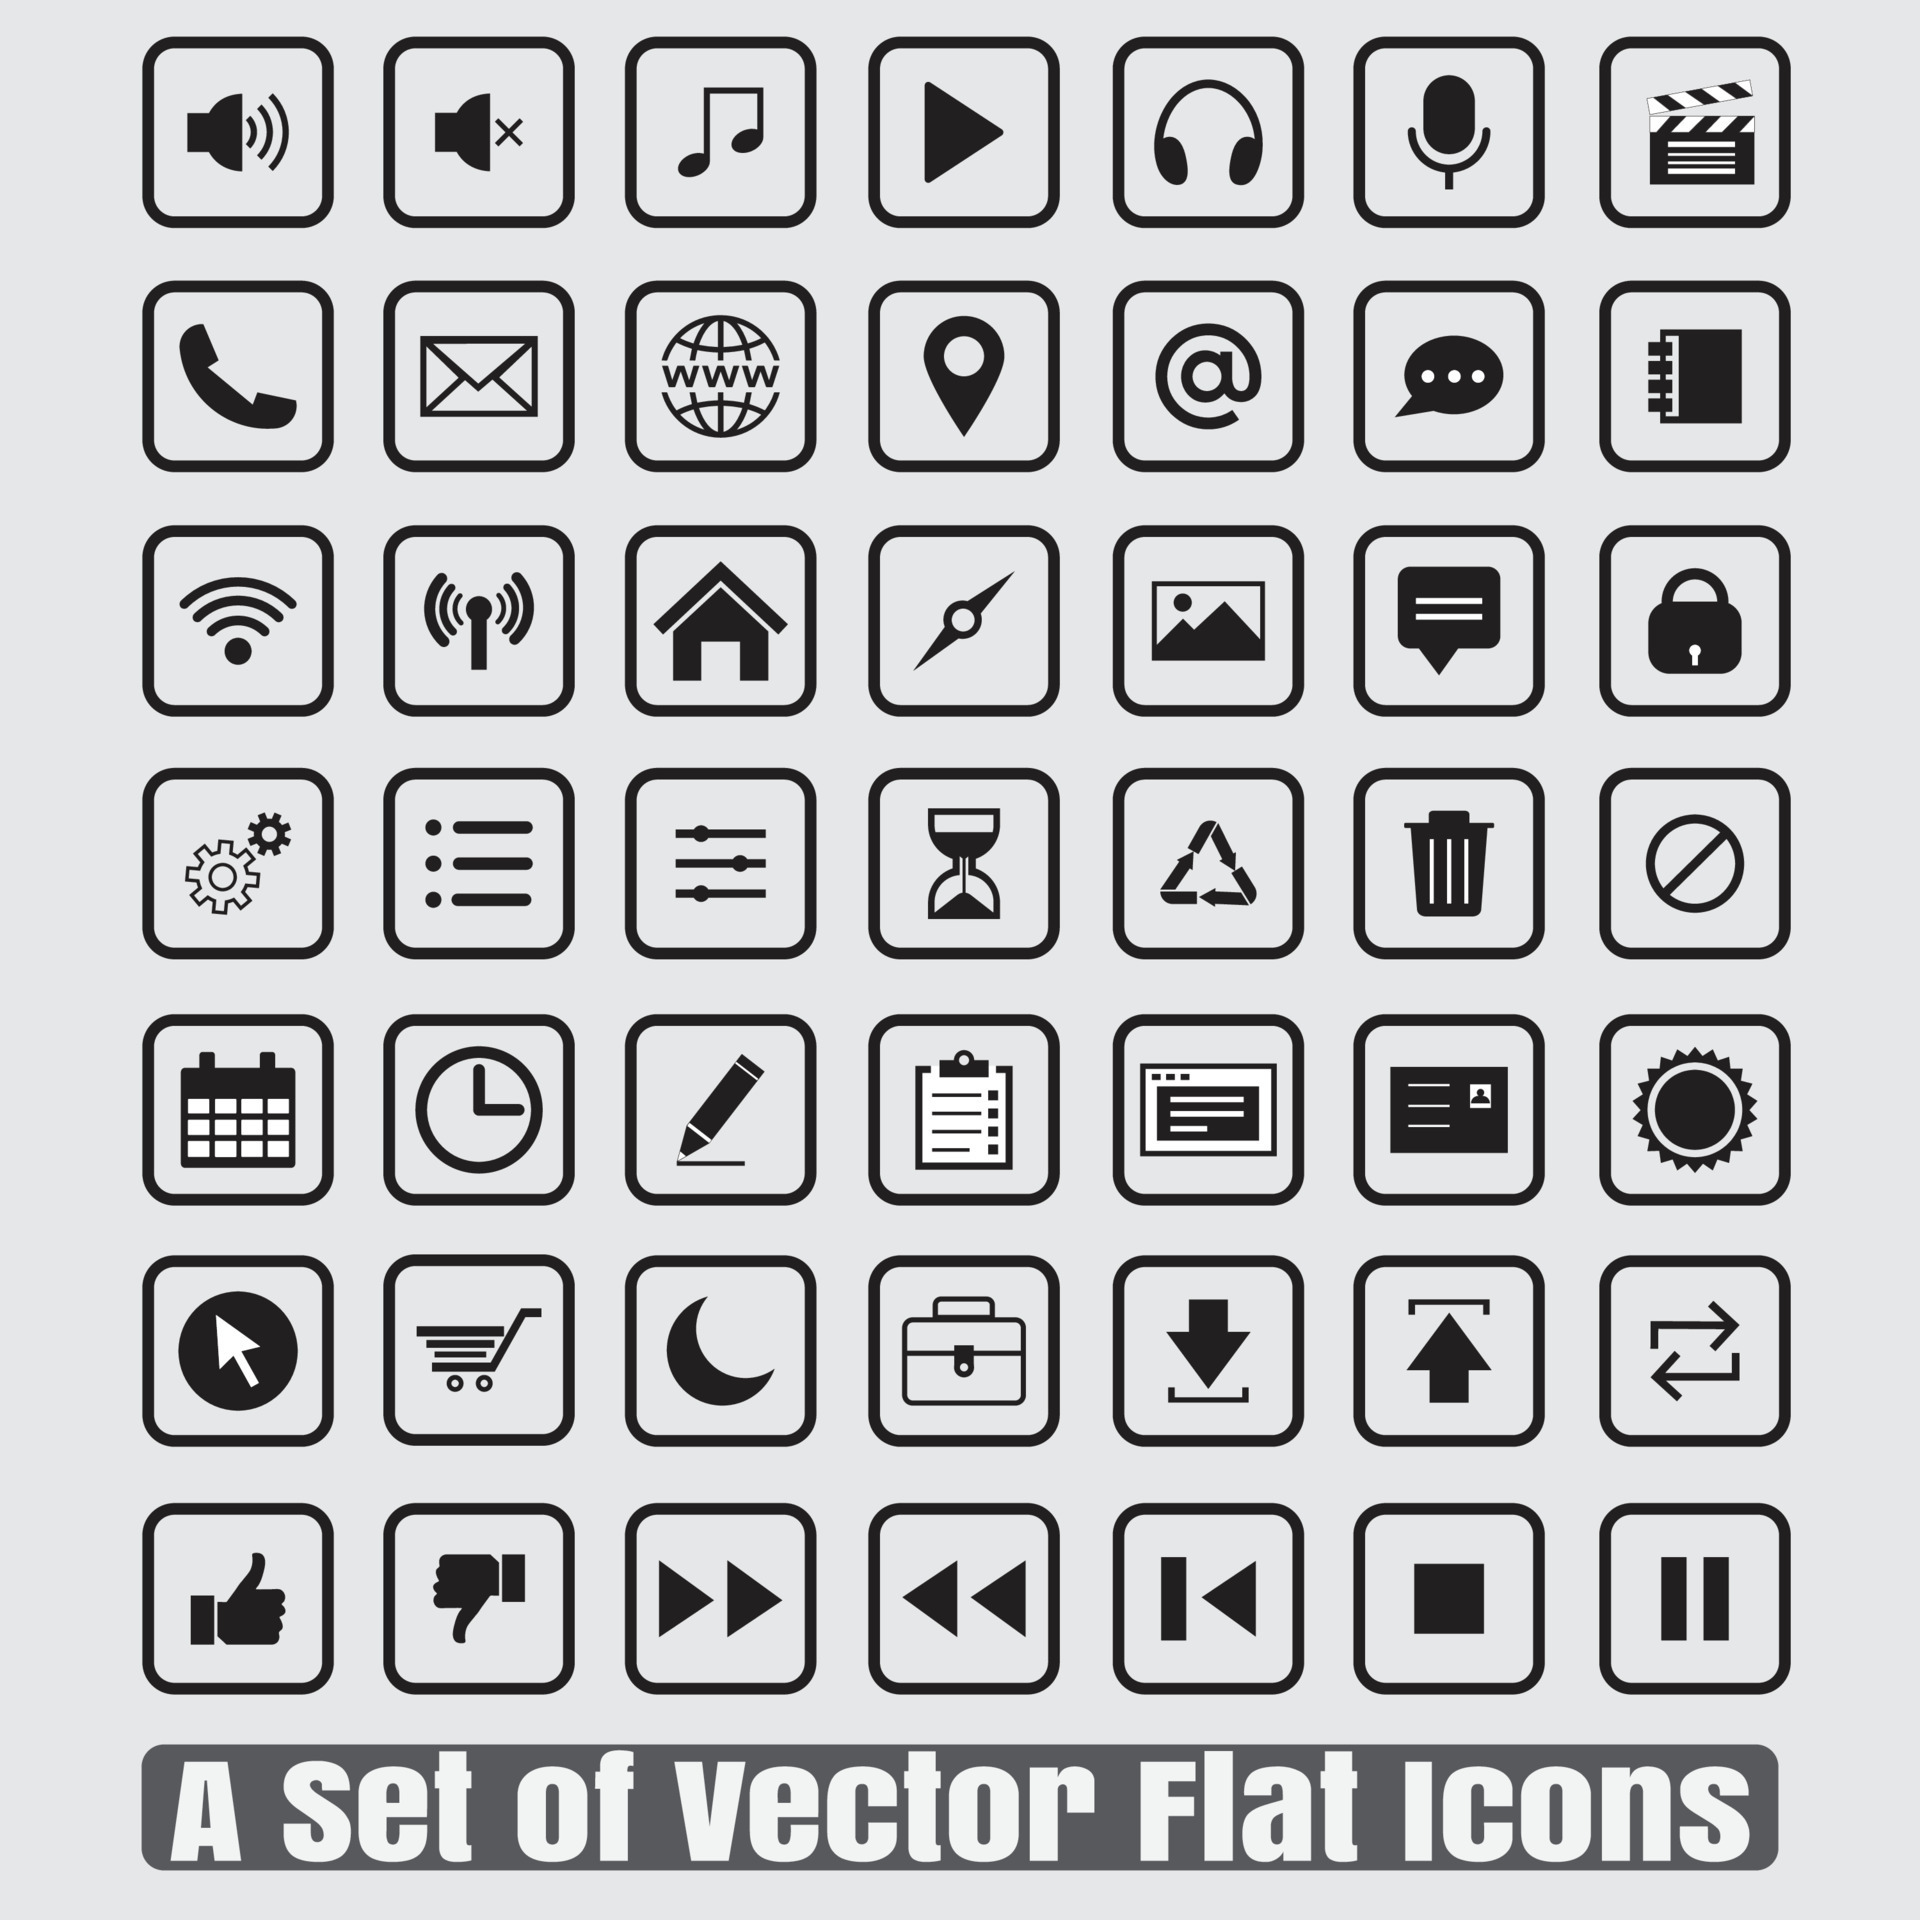 A Set of Vector Flat Icons.Transform your designs with our